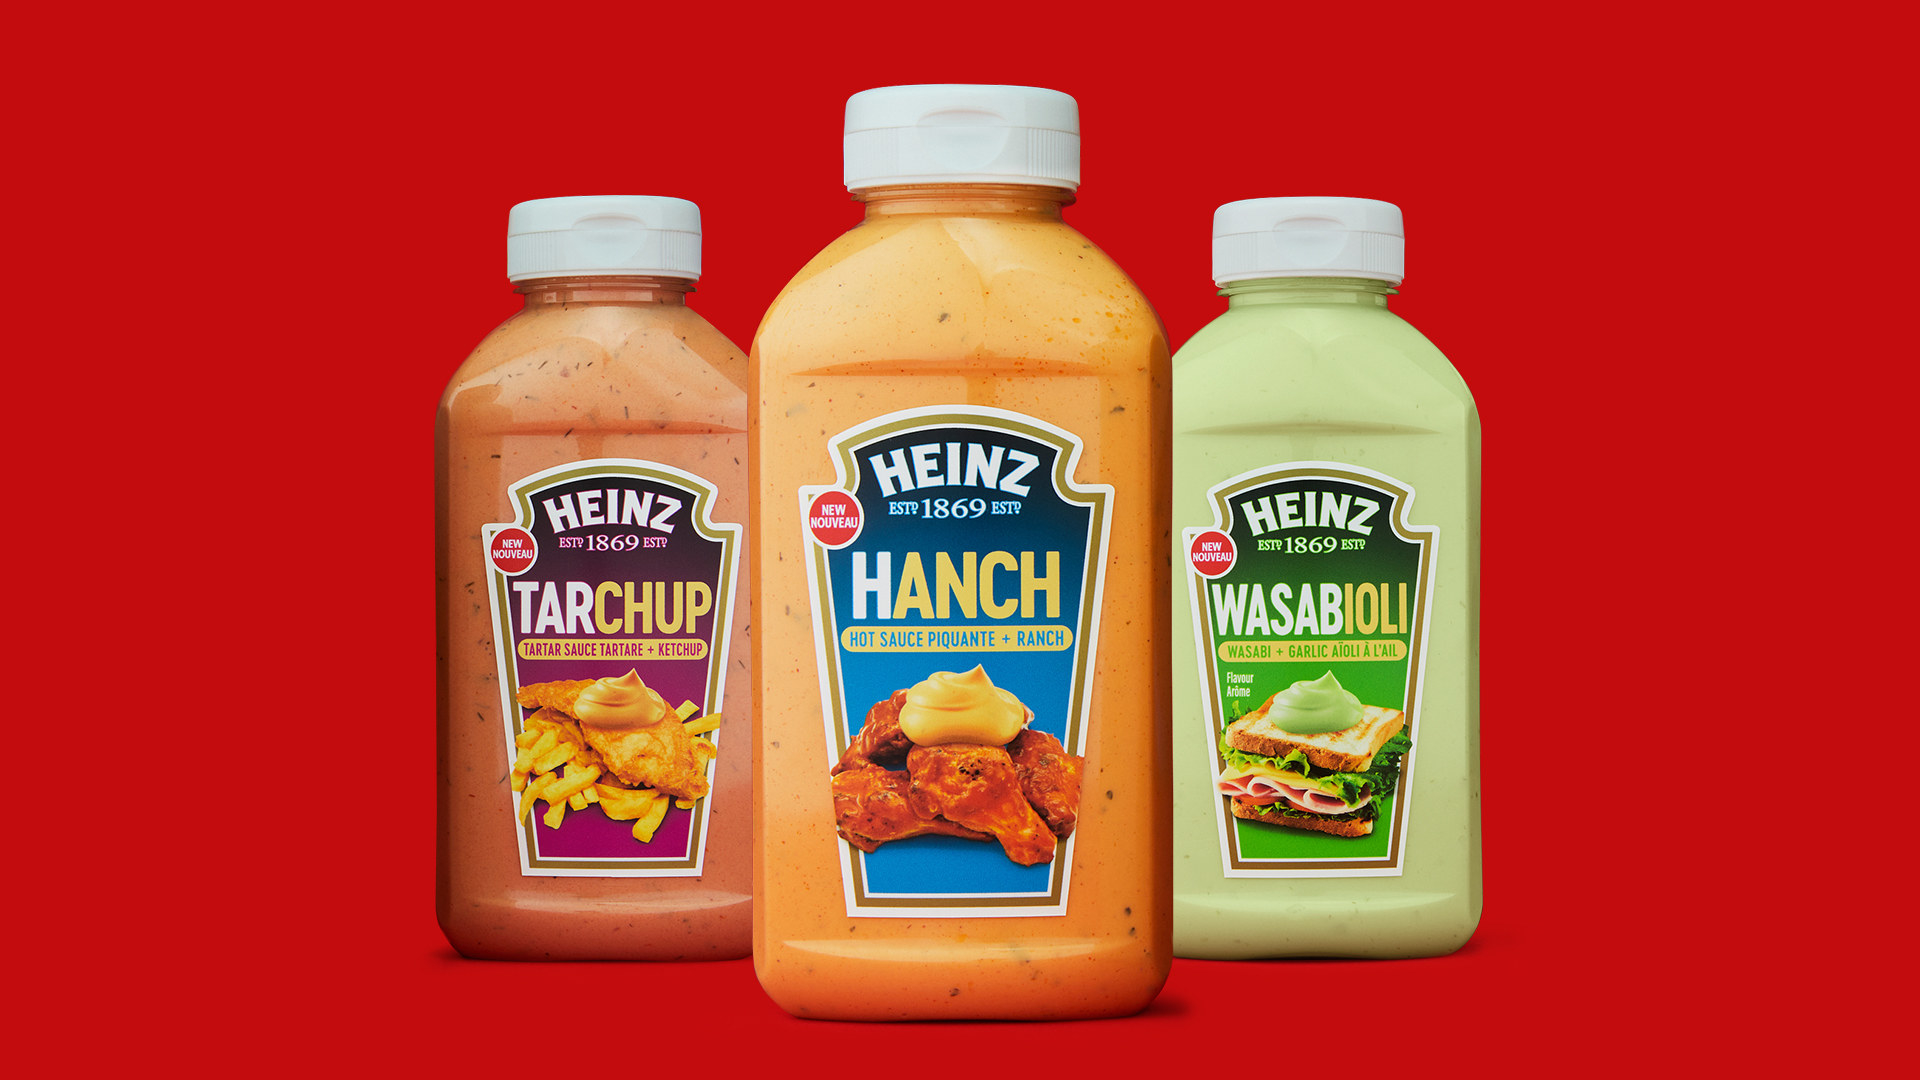 An image of 3 Heinz sauce bottles with a red backdrop. 